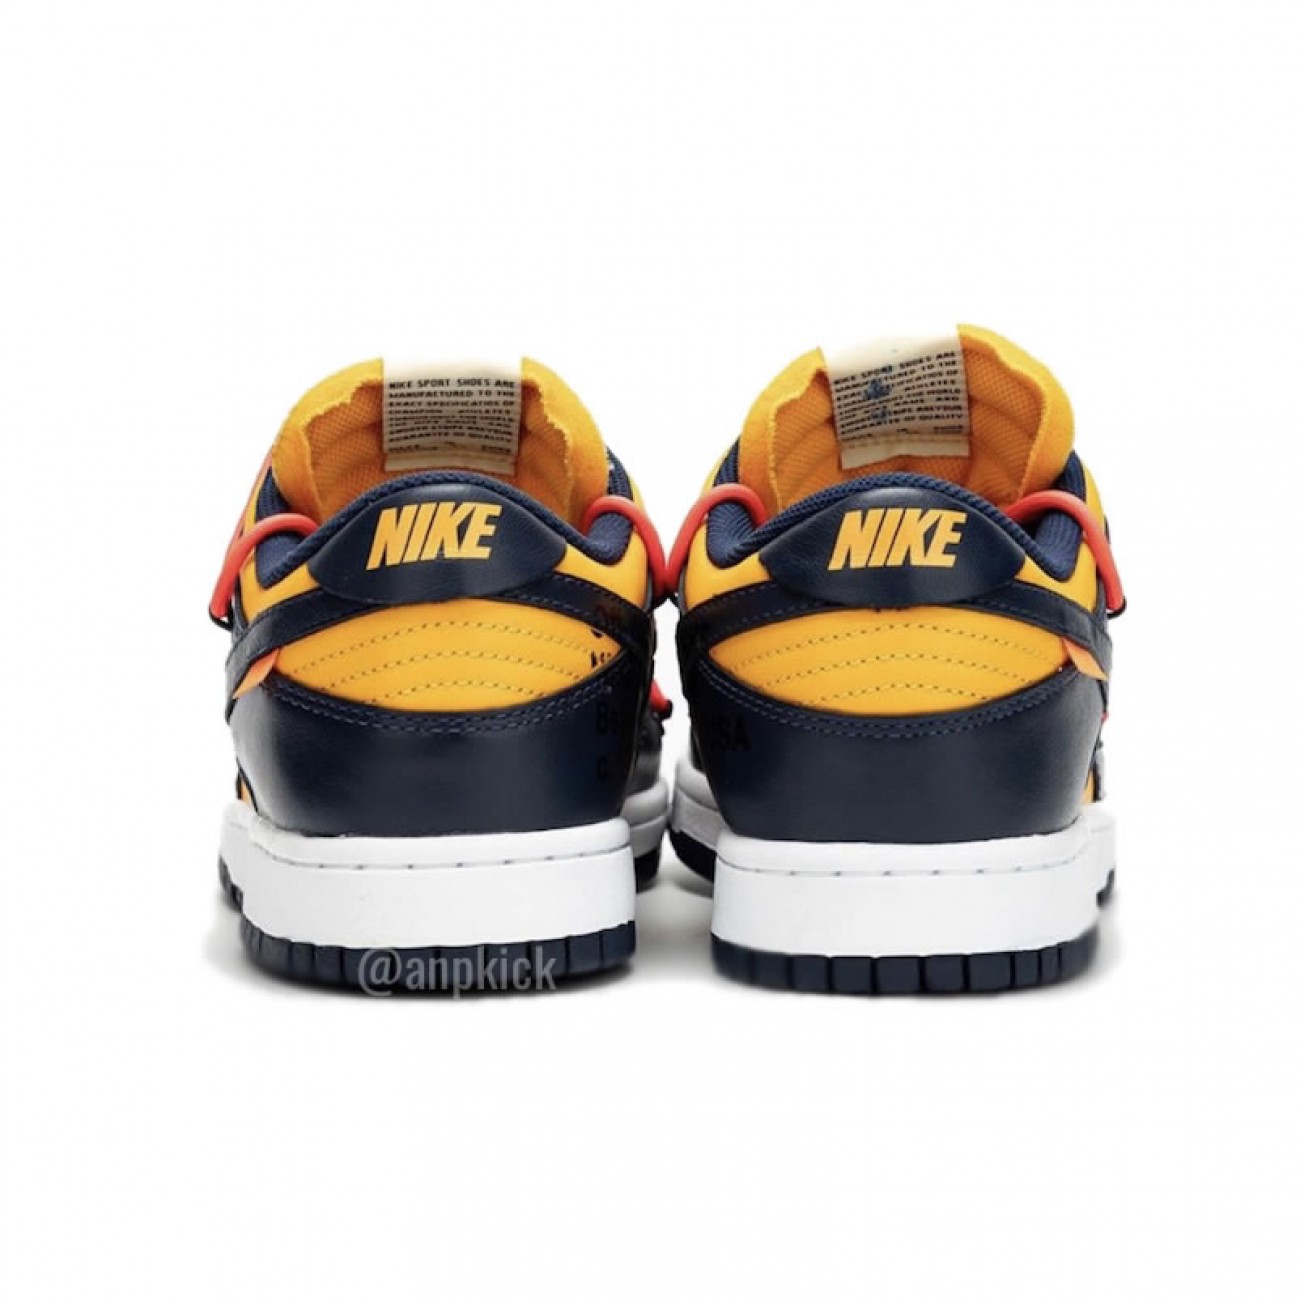 Off-White x Nike Dunk Low "University Gold" Release Date CT0856-700